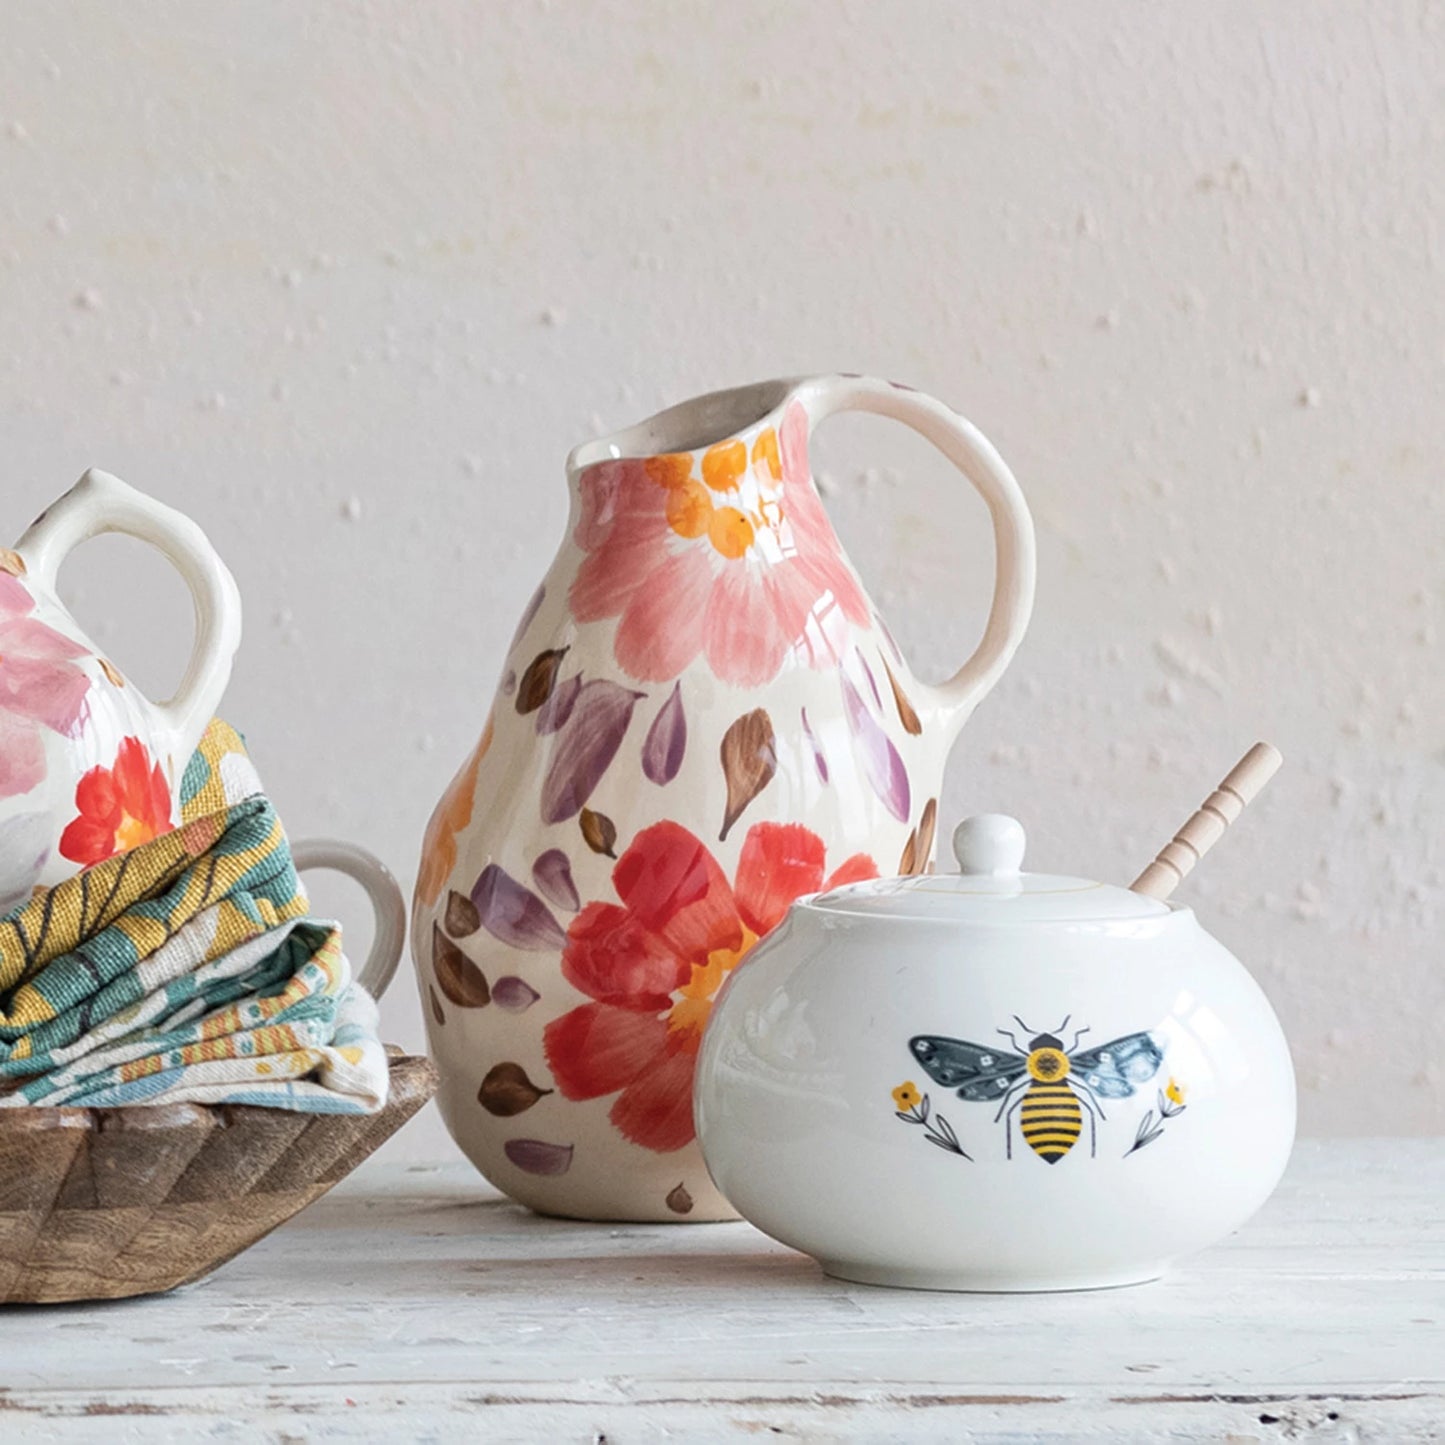 hand painted floral stoneware pitcher displayed next to a bowl filled with folded towels and sugar bowl on a whitewashed wooden table